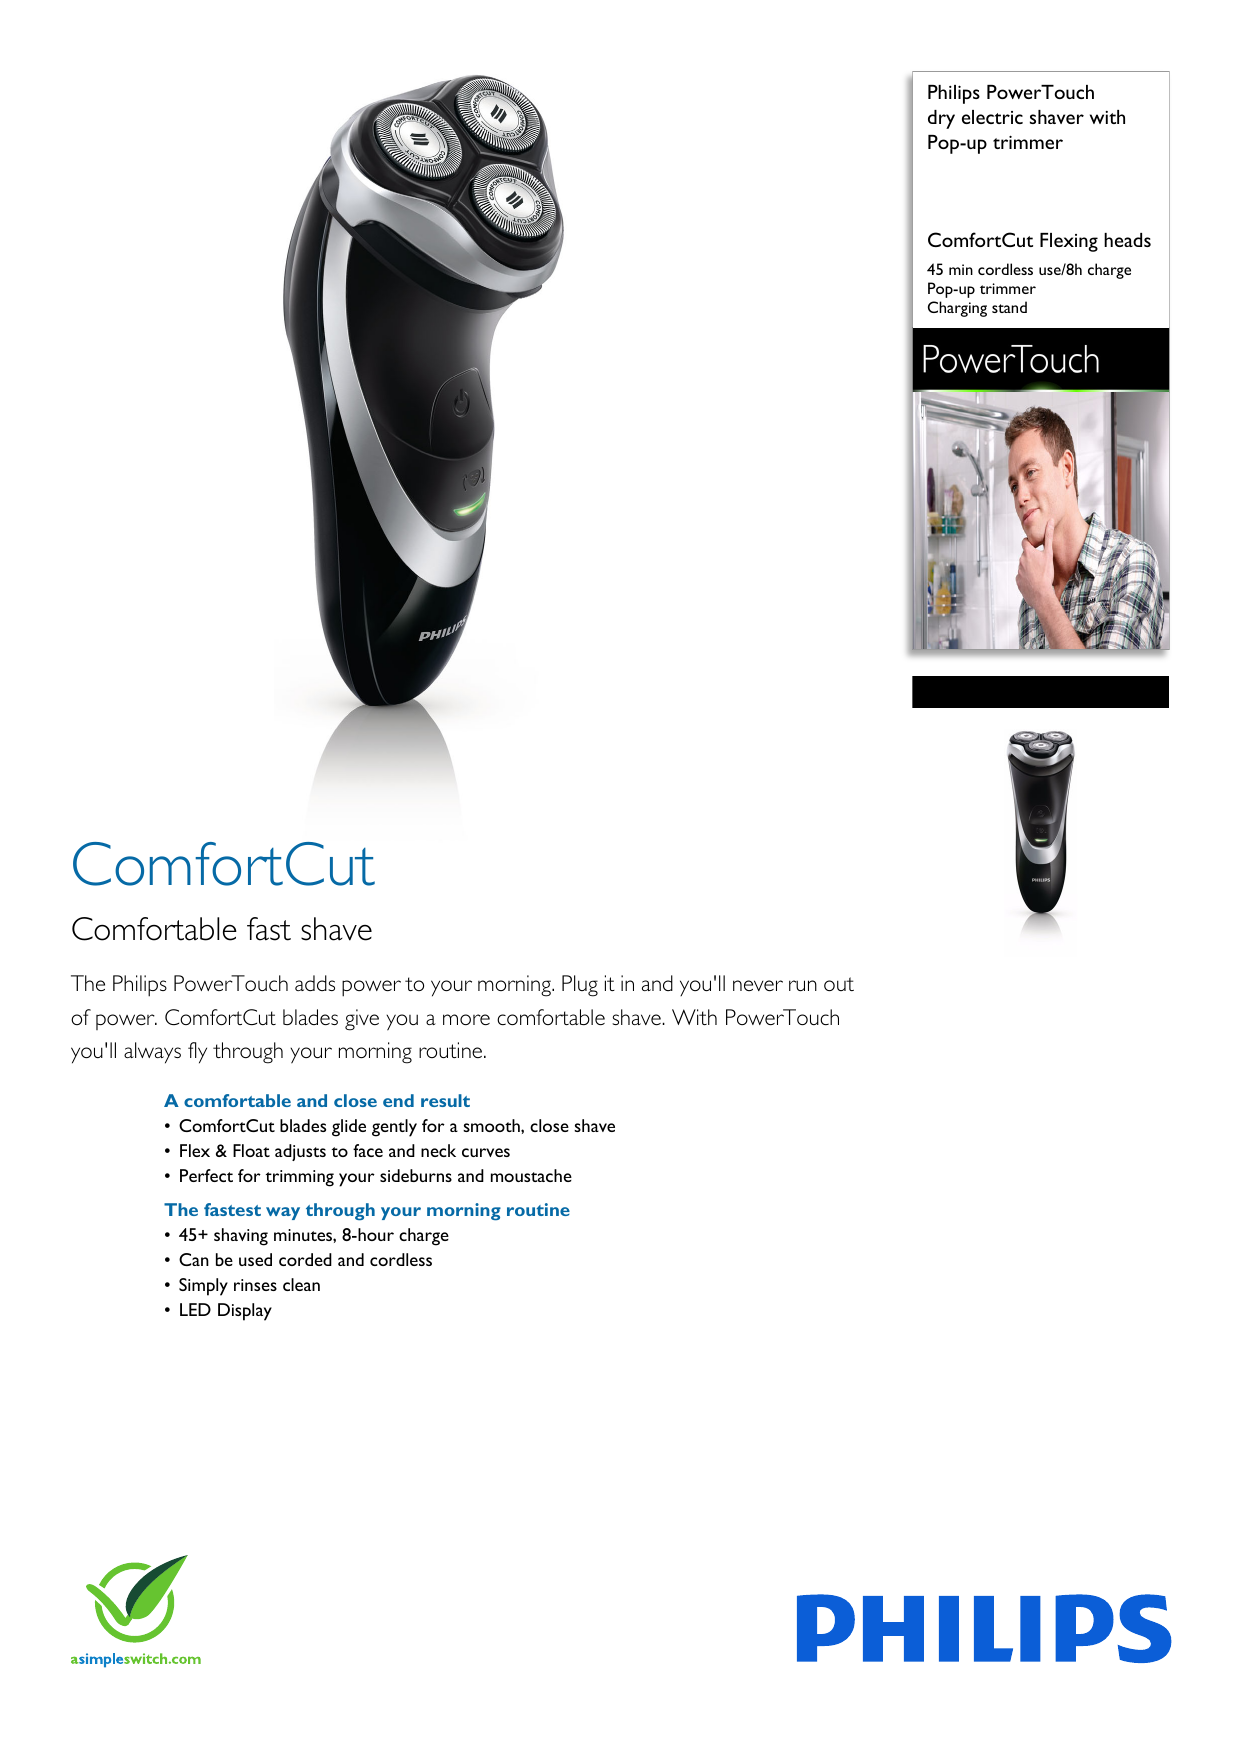 philips shaver with pop up trimmer